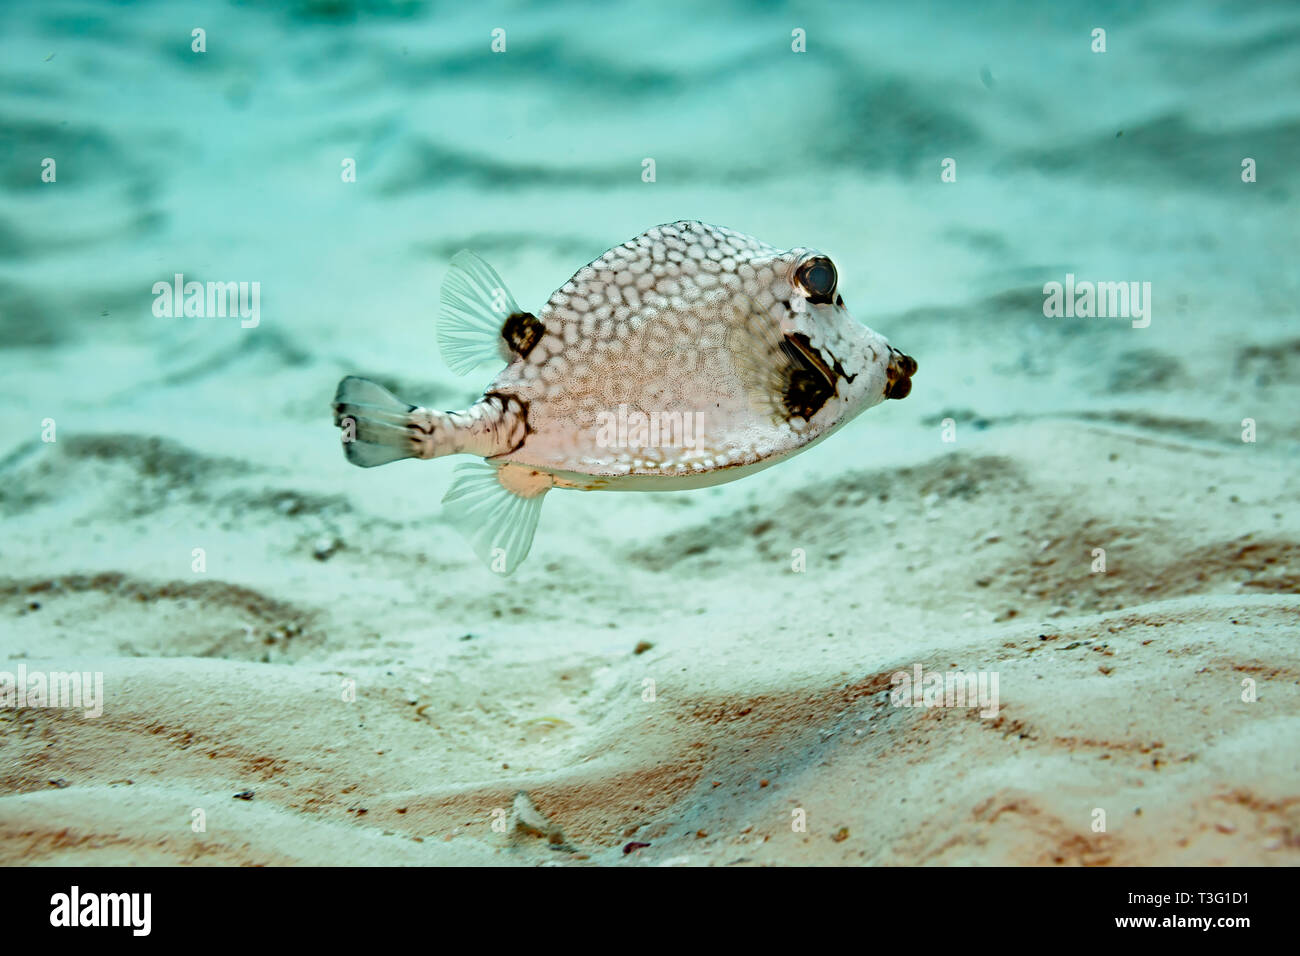 Closeup of side of smooth Trunkfish, Lactophrys triqueter, with white spots and honeycomb design swimming above coral on reef Stock Photo